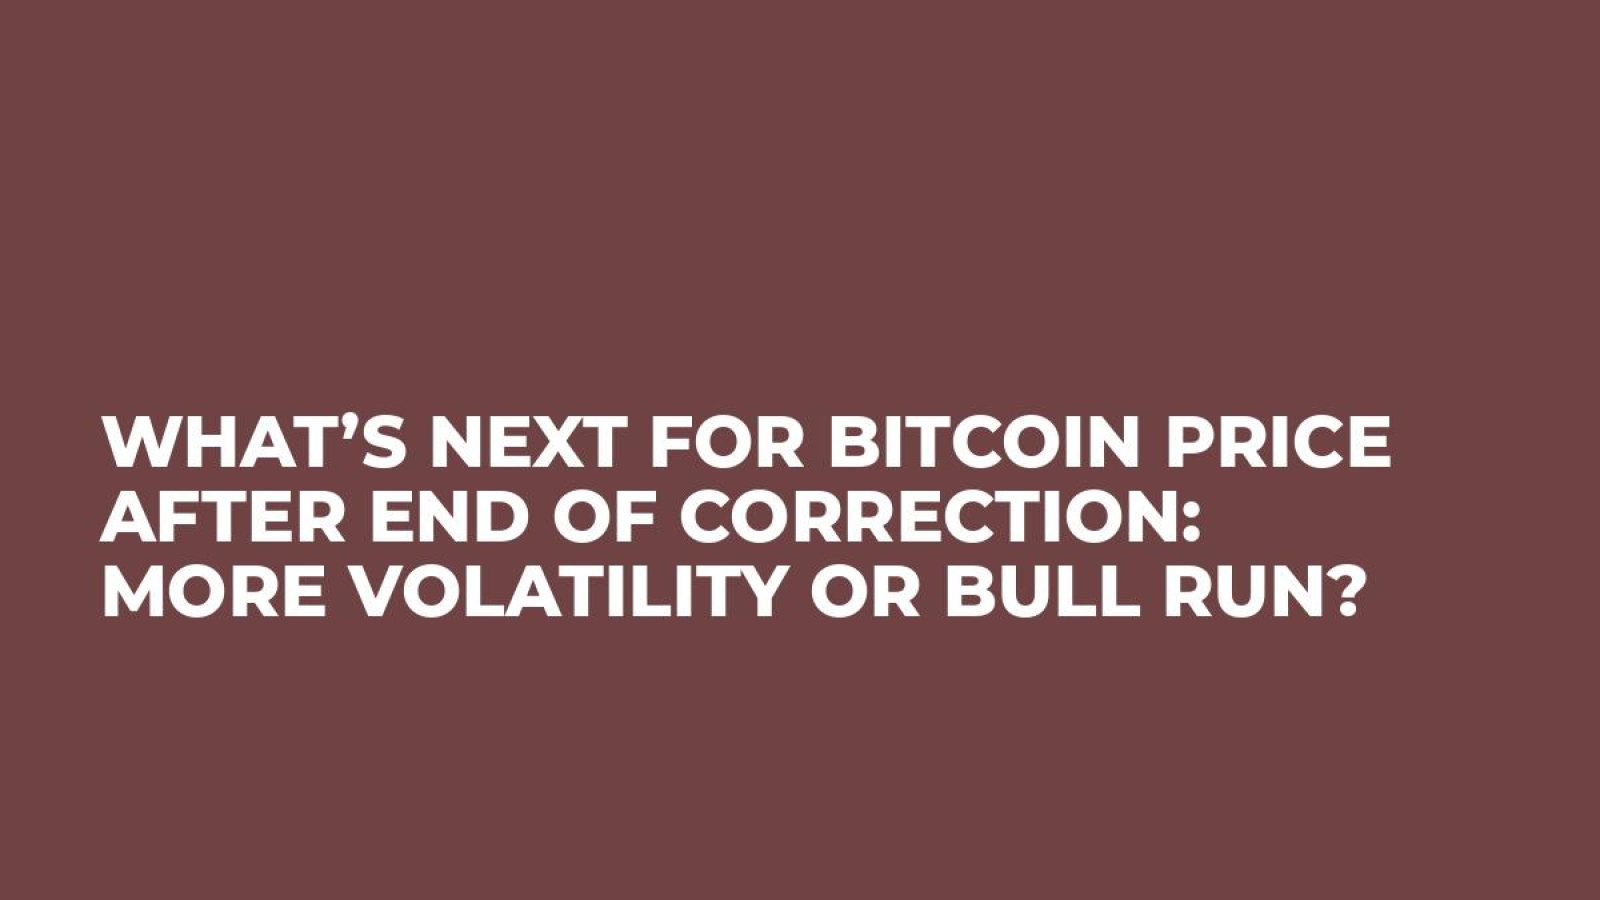 What’s Next for Bitcoin Price After End of Correction: More Volatility or Bull Run?